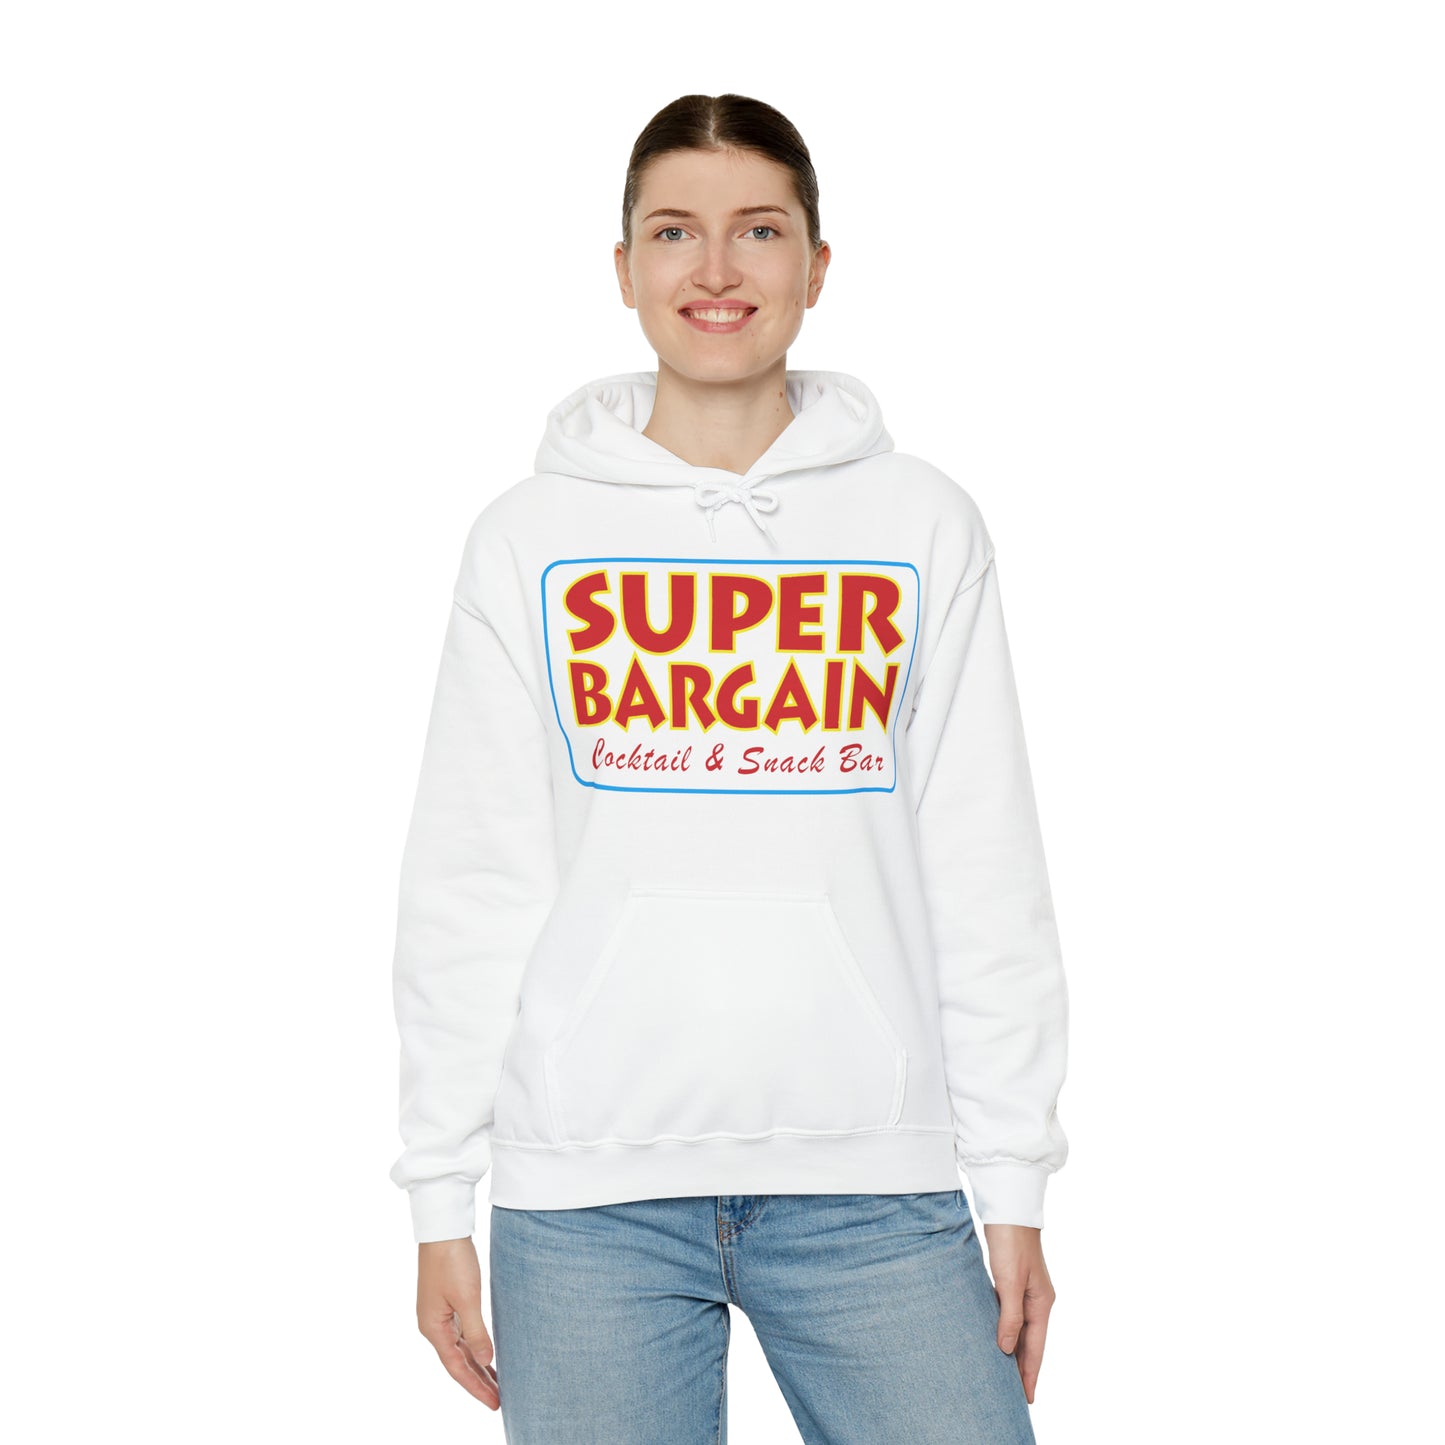 A woman smiling, wearing a white Unisex Heavy Blend™ Hooded Sweatshirt from Printify with the text "SUPER BARGAIN Cocktail & Snack Bar Cabbagetown" in colorful fonts on the front. She is also wearing blue jeans.